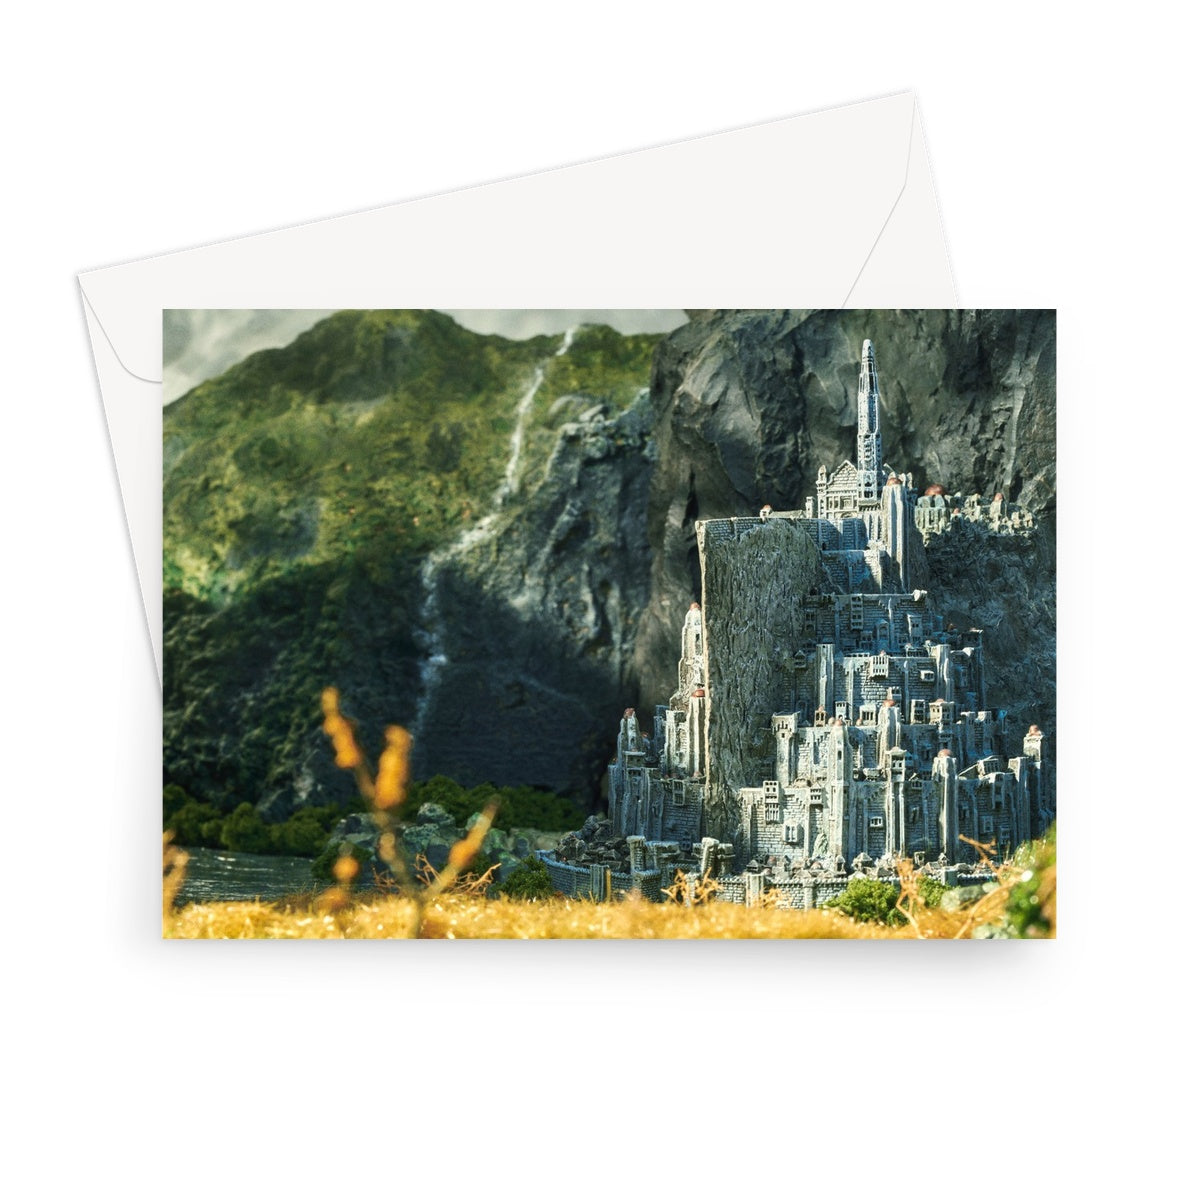 Miniverse - Mythical Landscape - Greetings Card